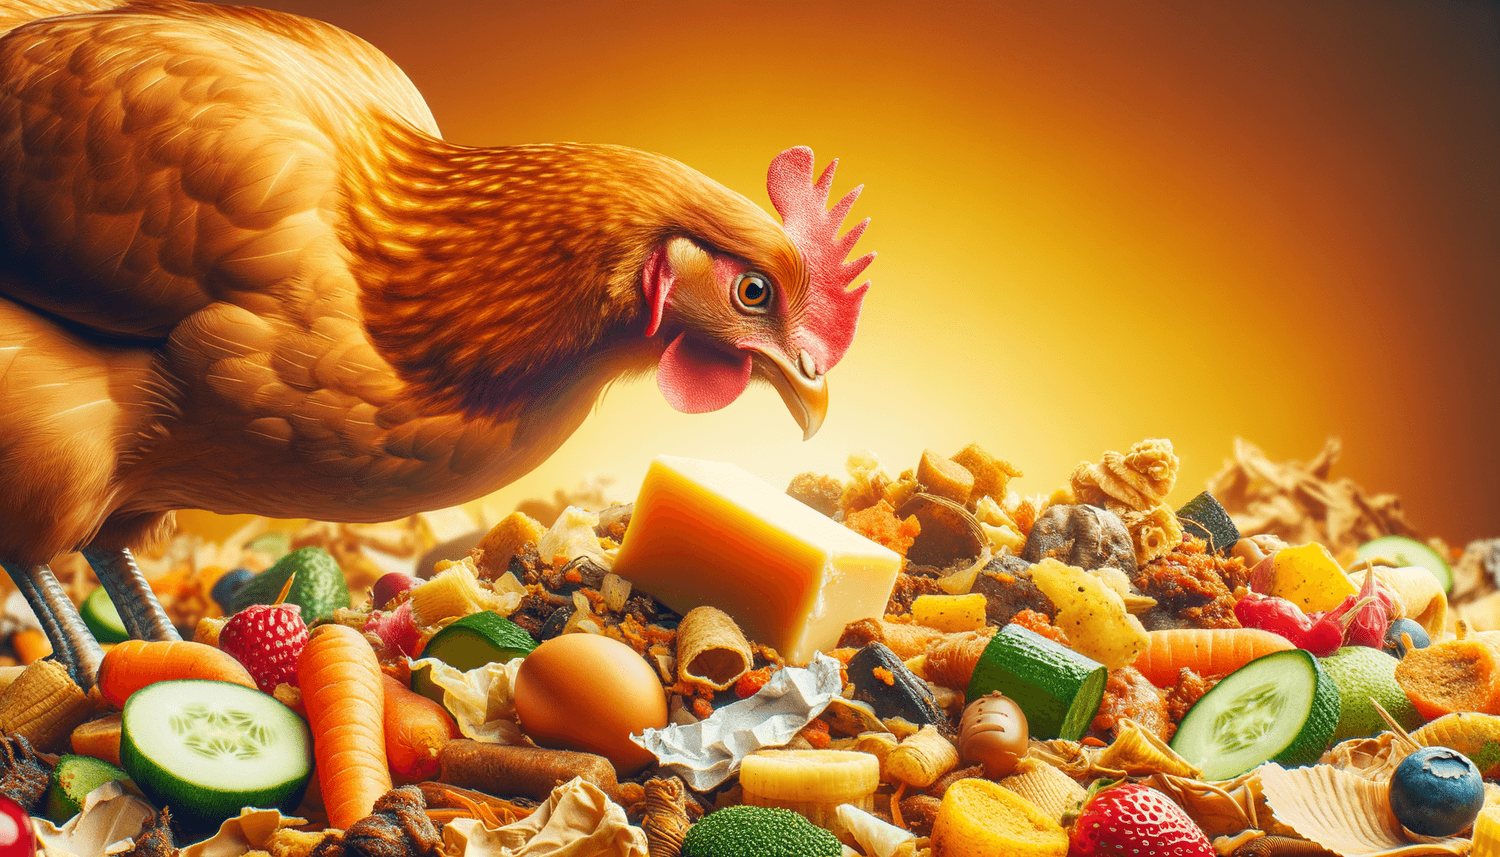 Can Chickens Eat Fat?